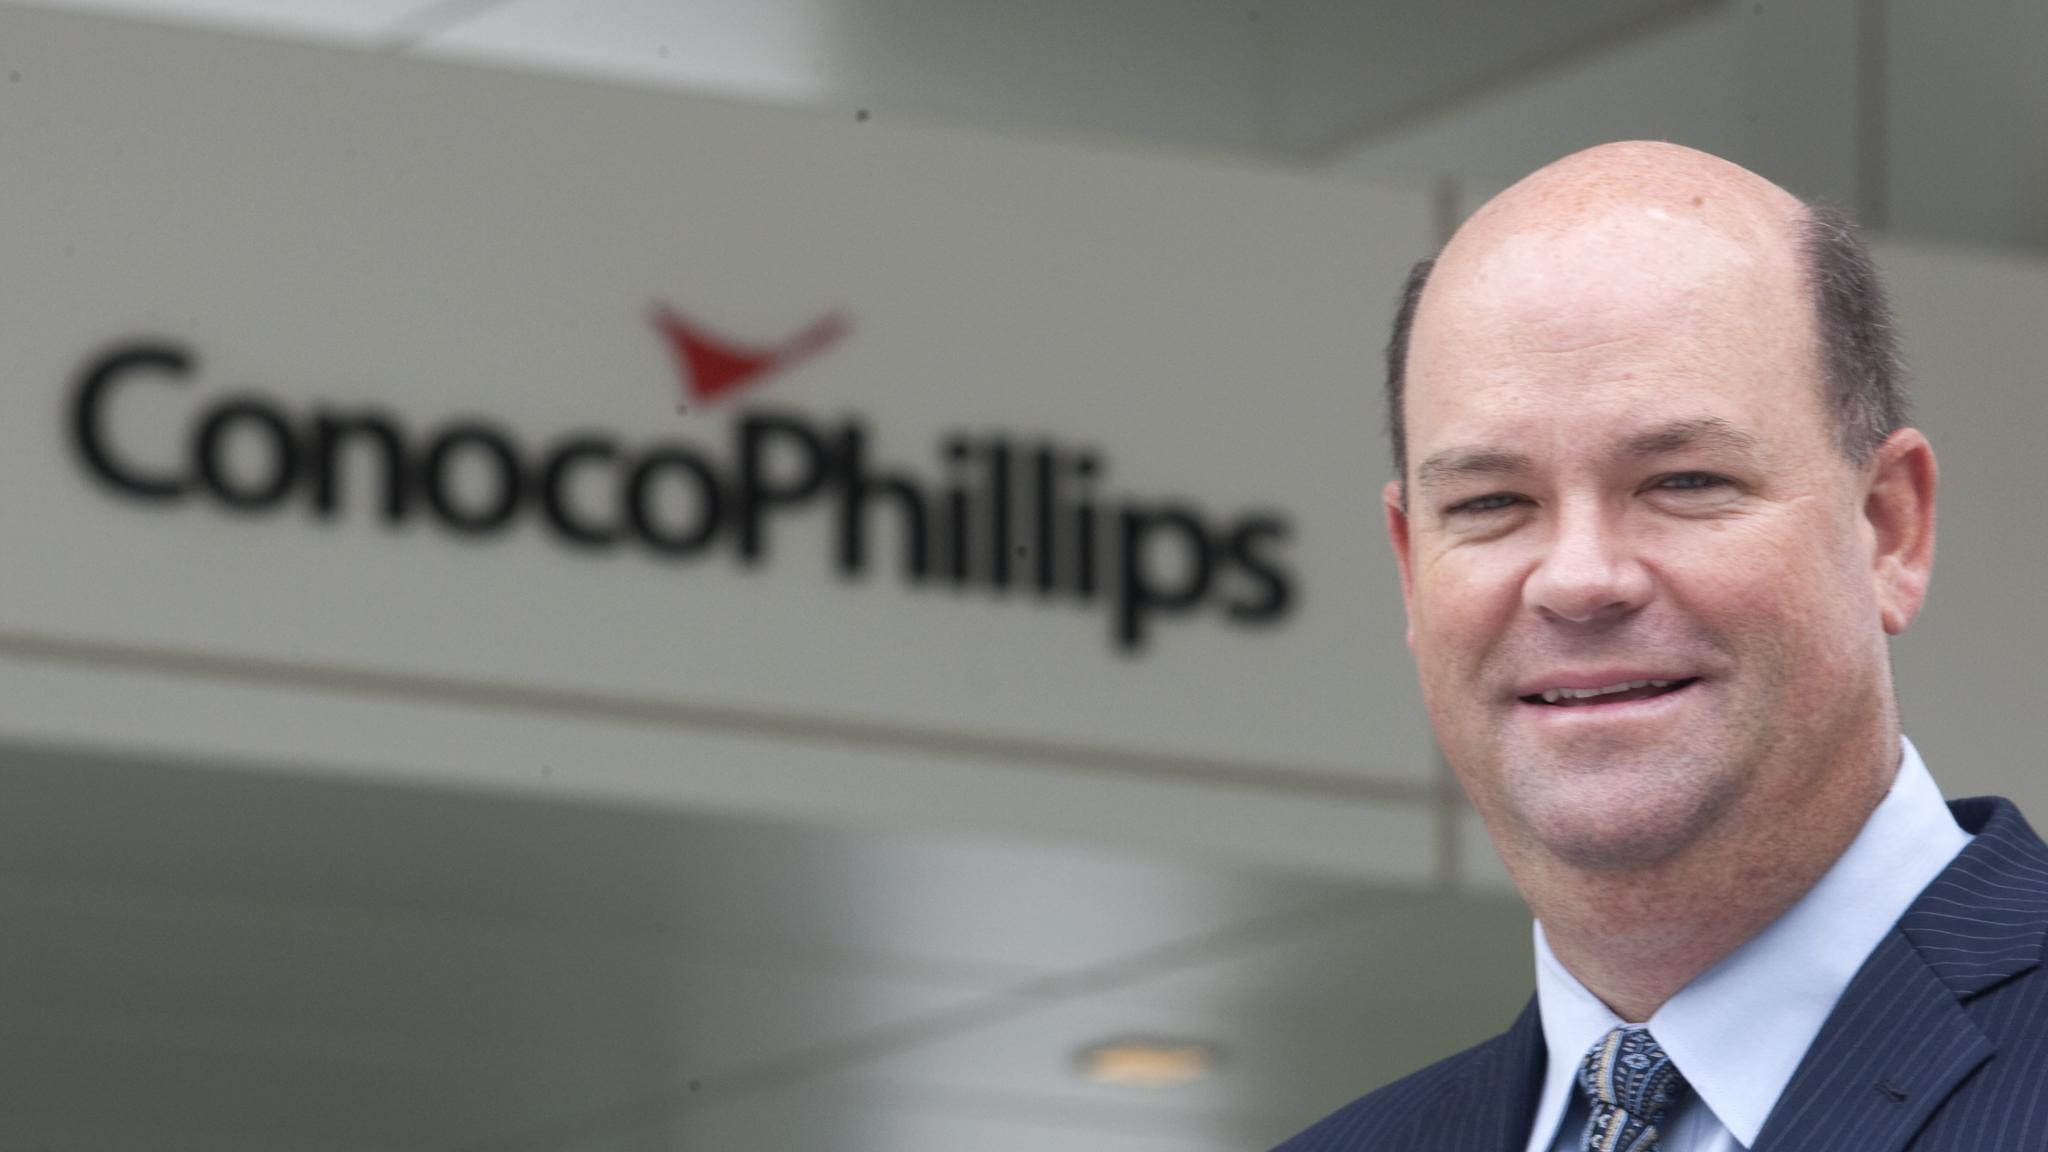 ConocoPhillips CEO Ryan Lance is photographed  on Friday, April 27, 2012 at the ConocoPhilips headquarters in Houston, TX.  ( J. Patric Schneider  )